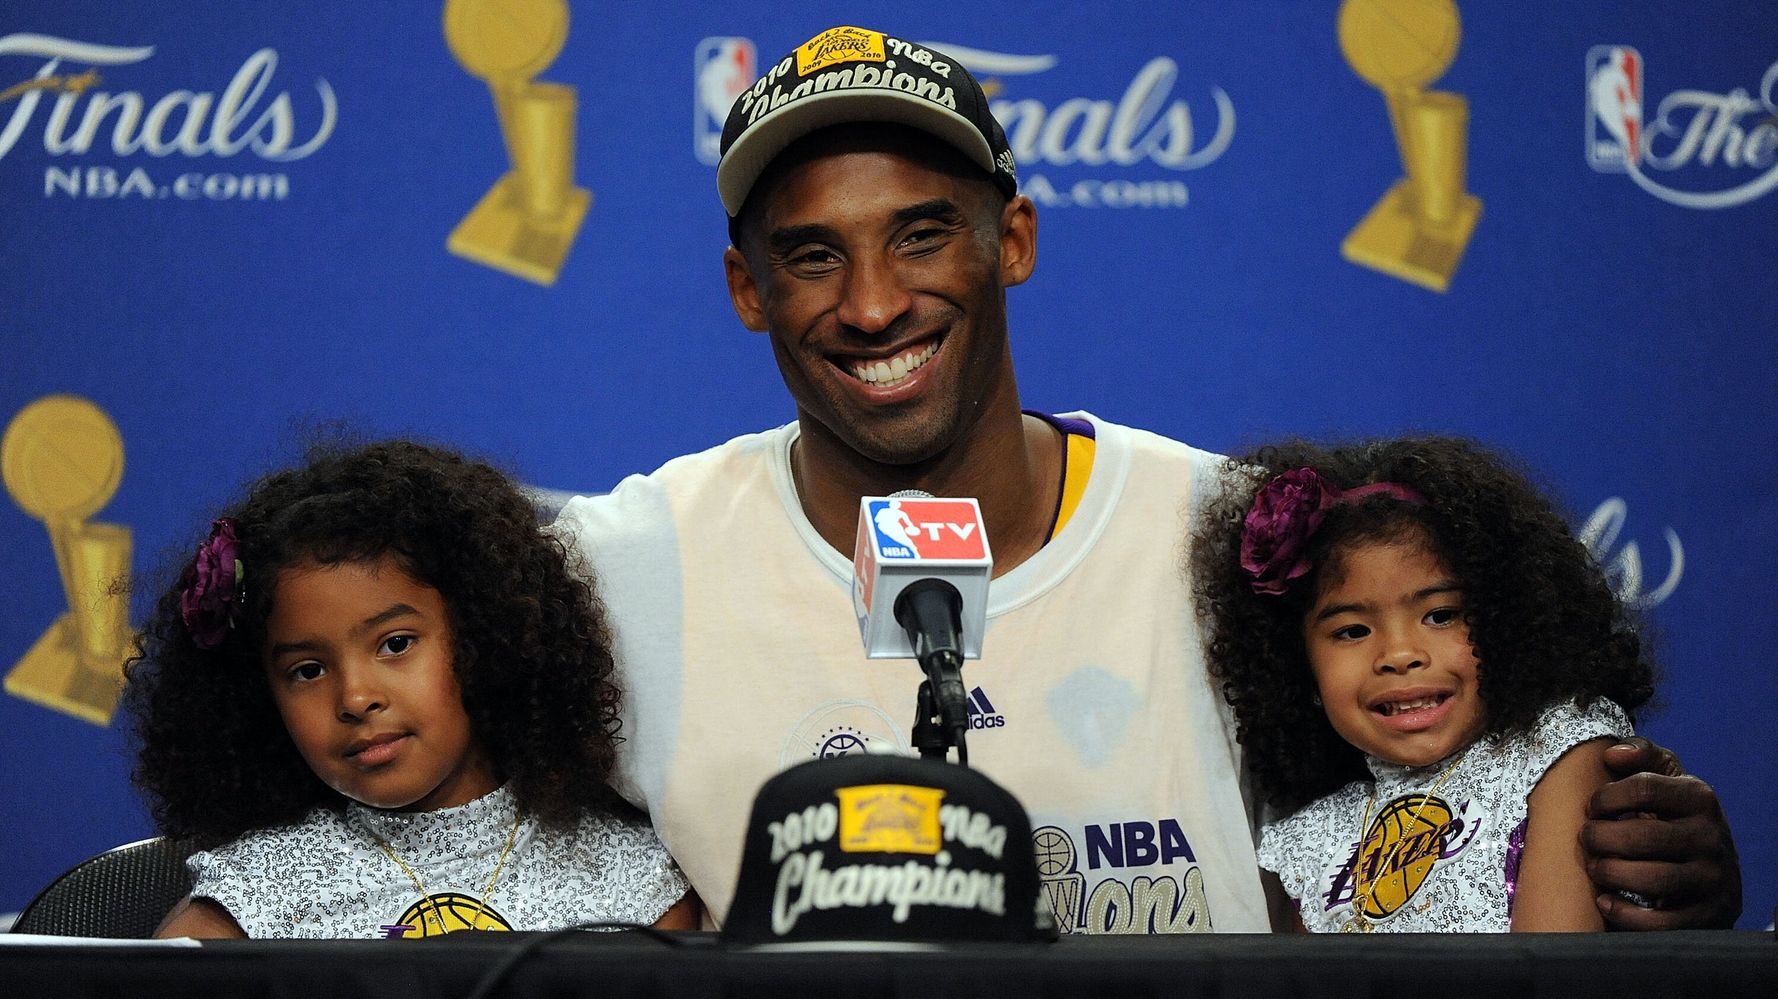 Kobe doesn't think parents will attend final game